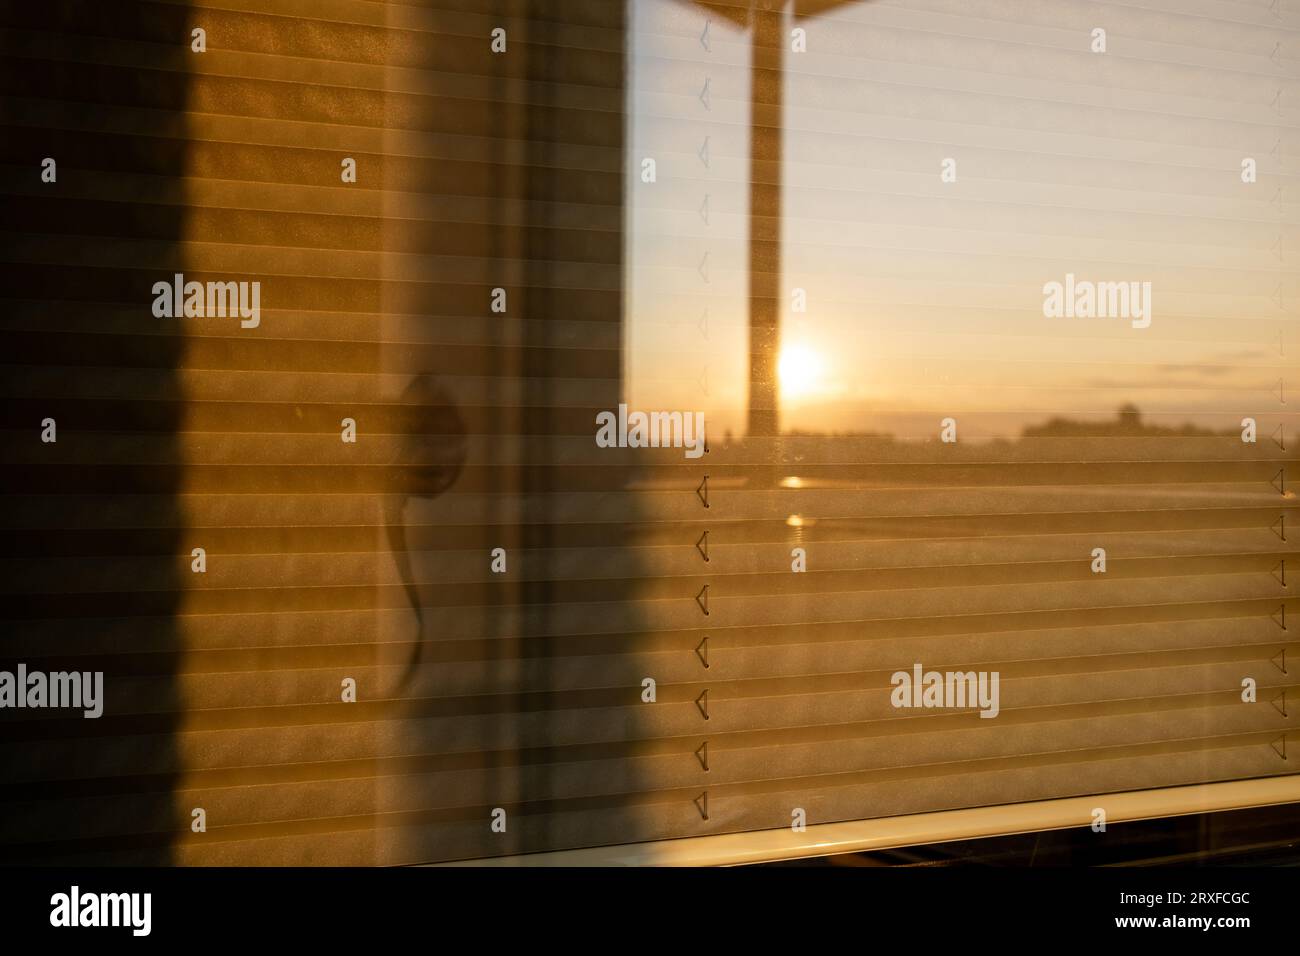 View of the window from the outside, closed with blinds, the setting sun is visible in the reflection Stock Photo